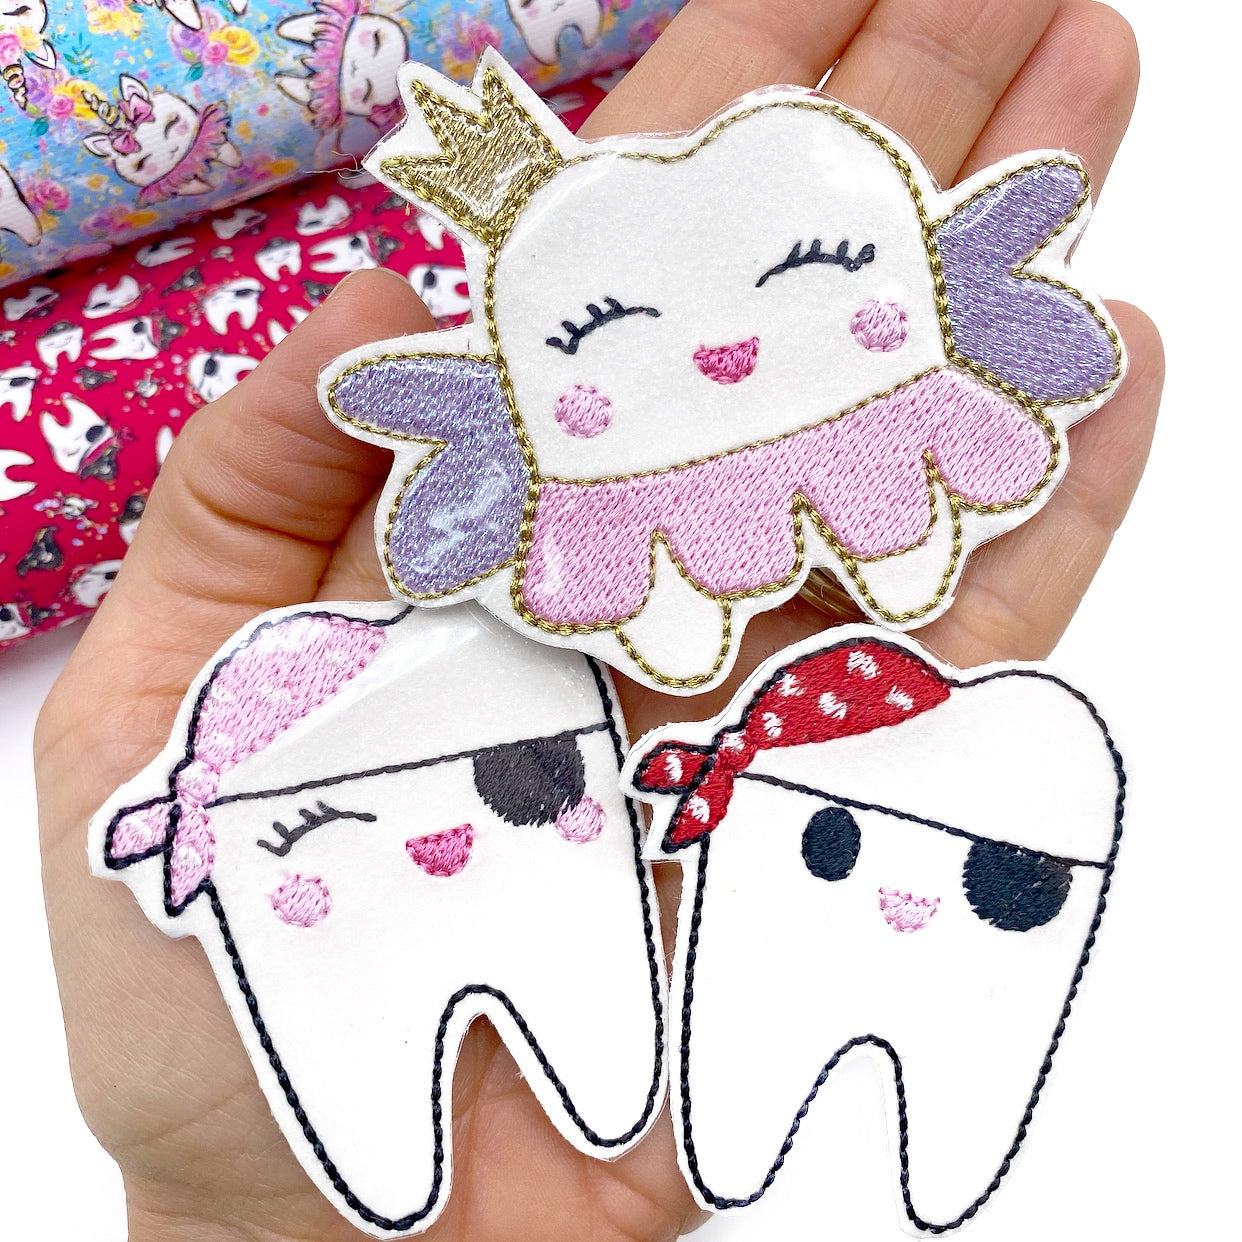 Embroidered Tooth Fairy Tooth/Coin Pocket Pouch